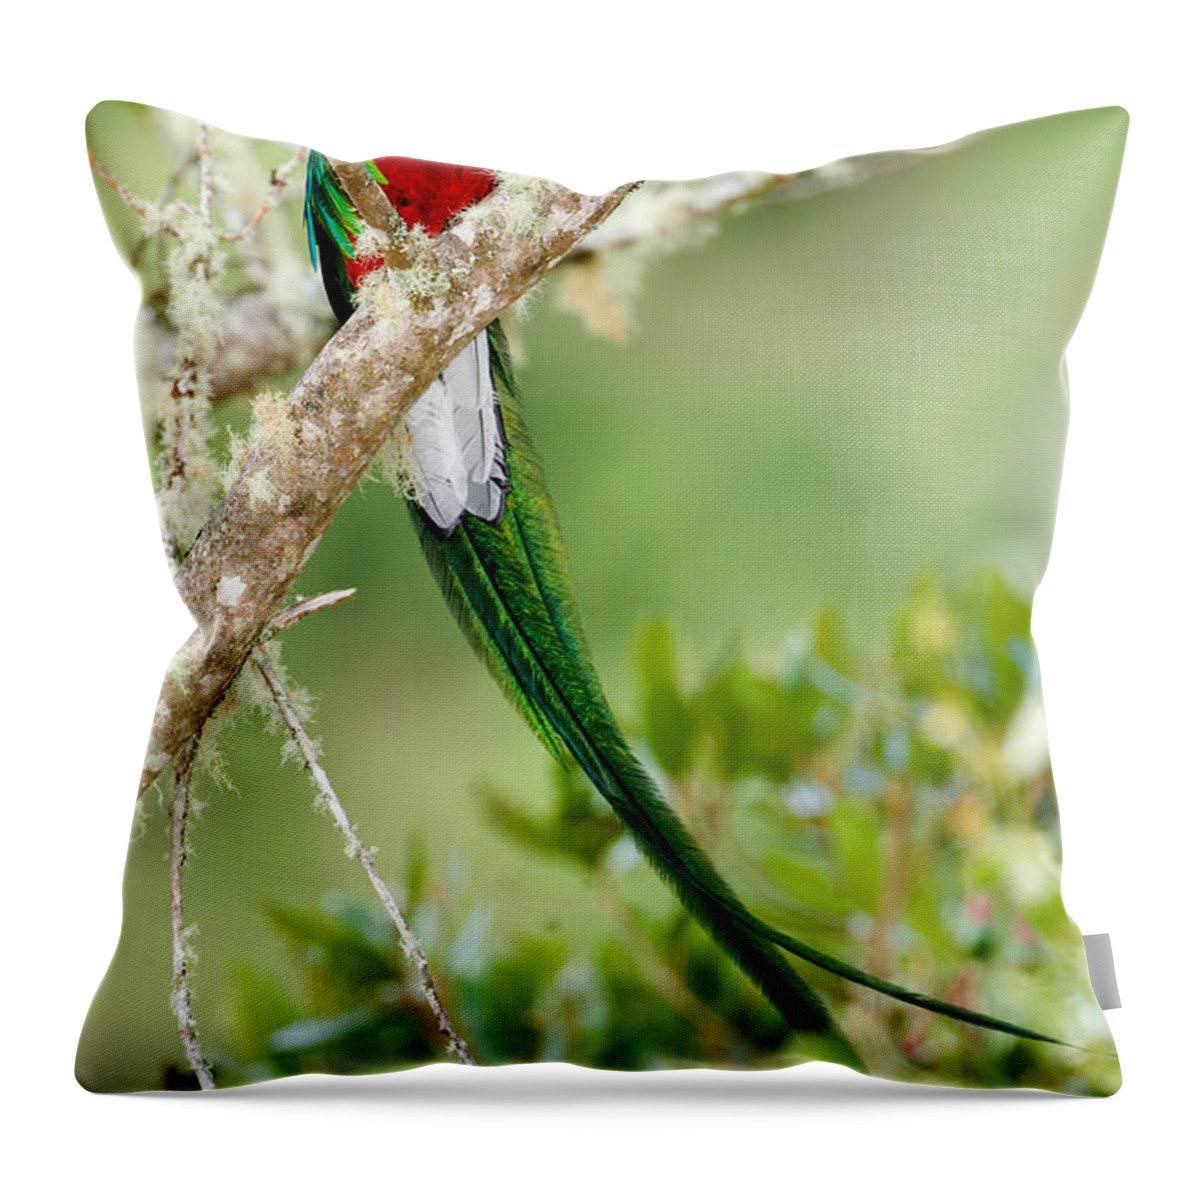 Photography Throw Pillow featuring the photograph Close-up Of Resplendent Quetzal by Panoramic Images